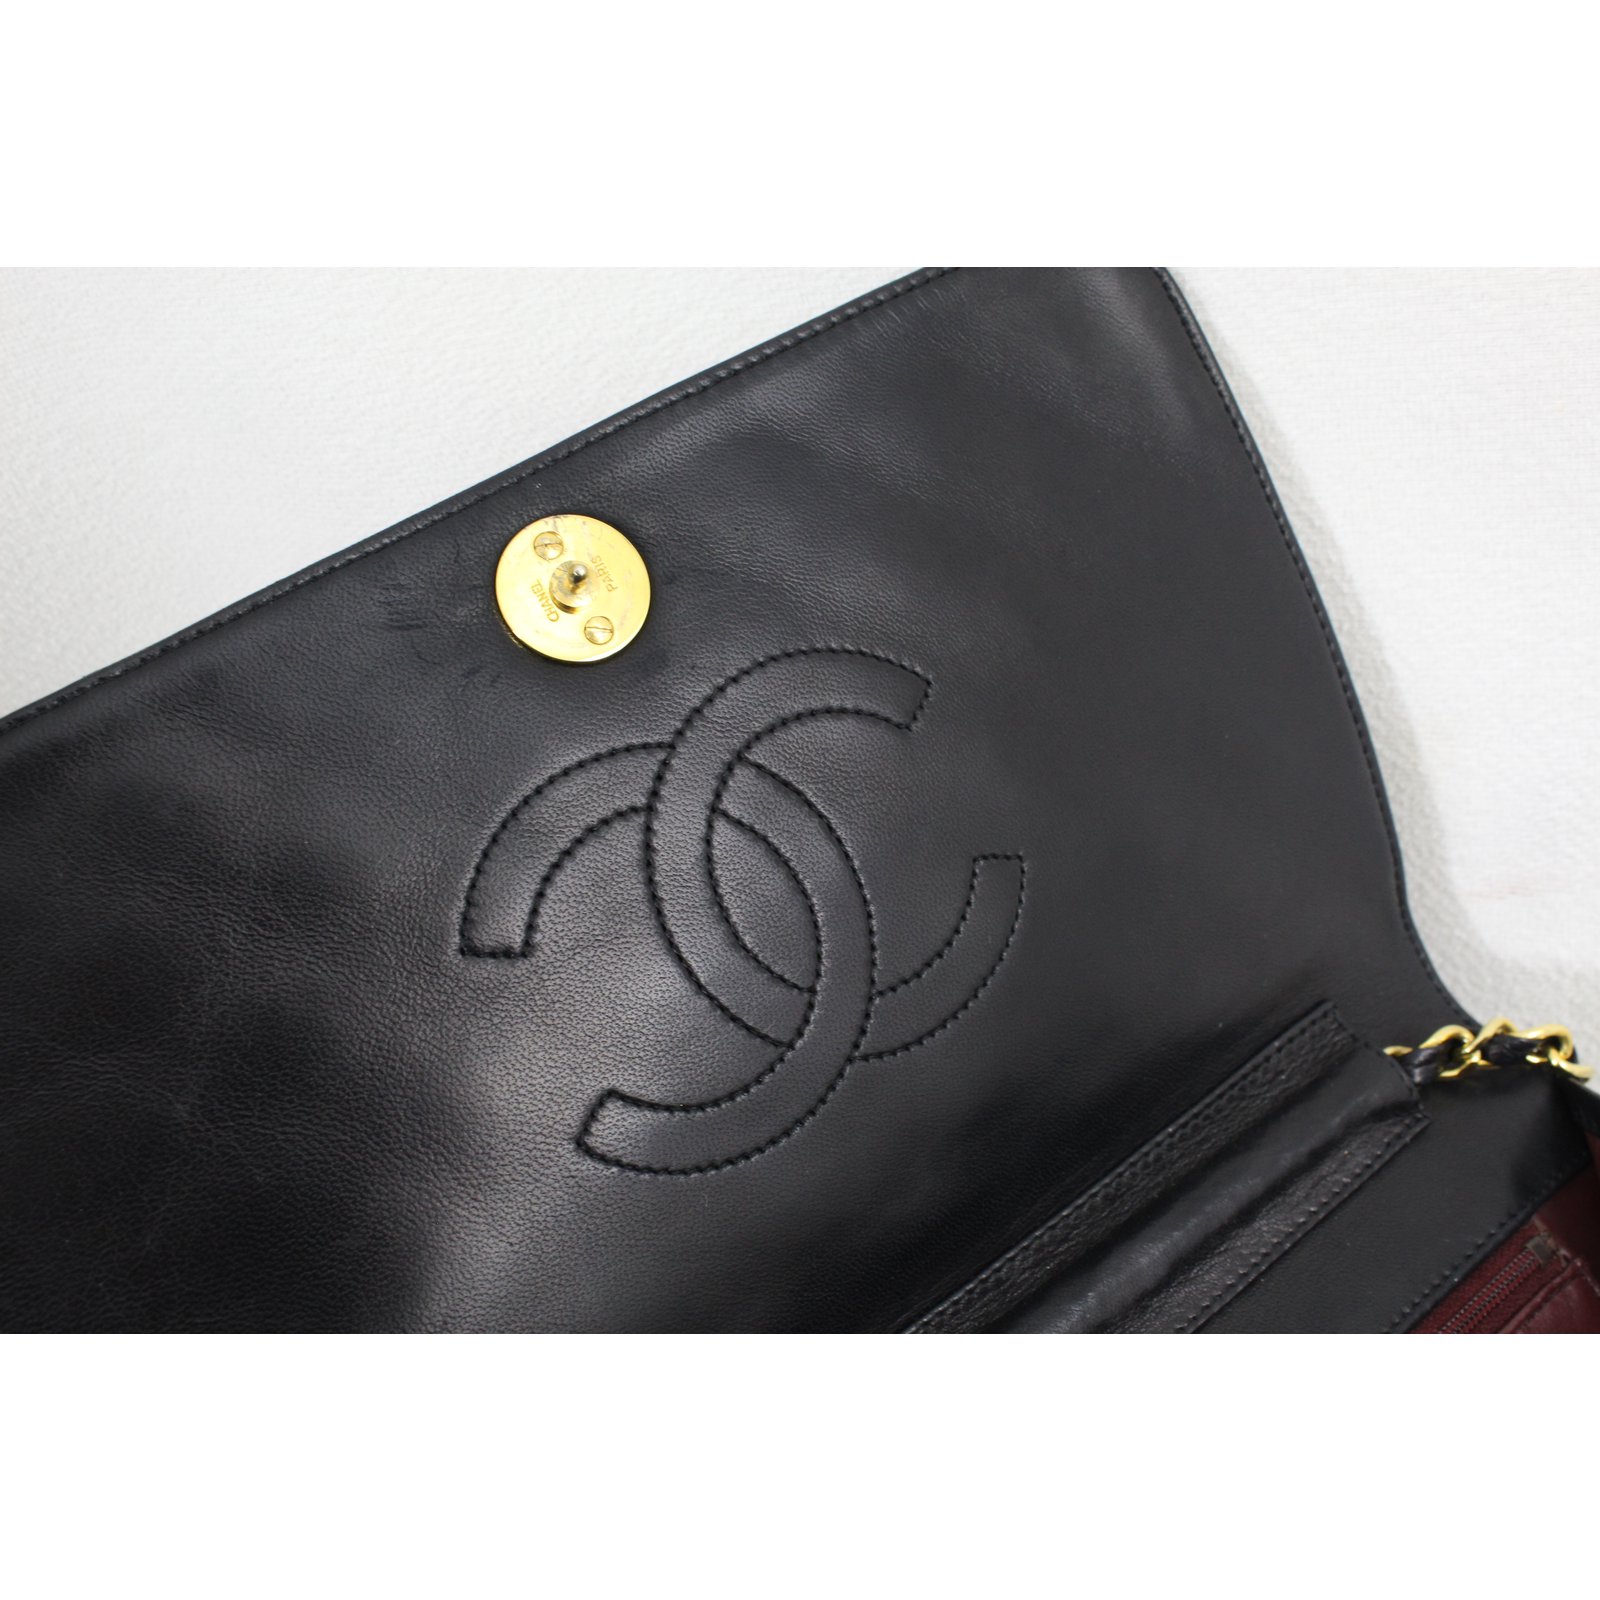 Chanel Vintage 90's Woc Wallet On A Chain Black Calfskin Leather Cross Body  Bag